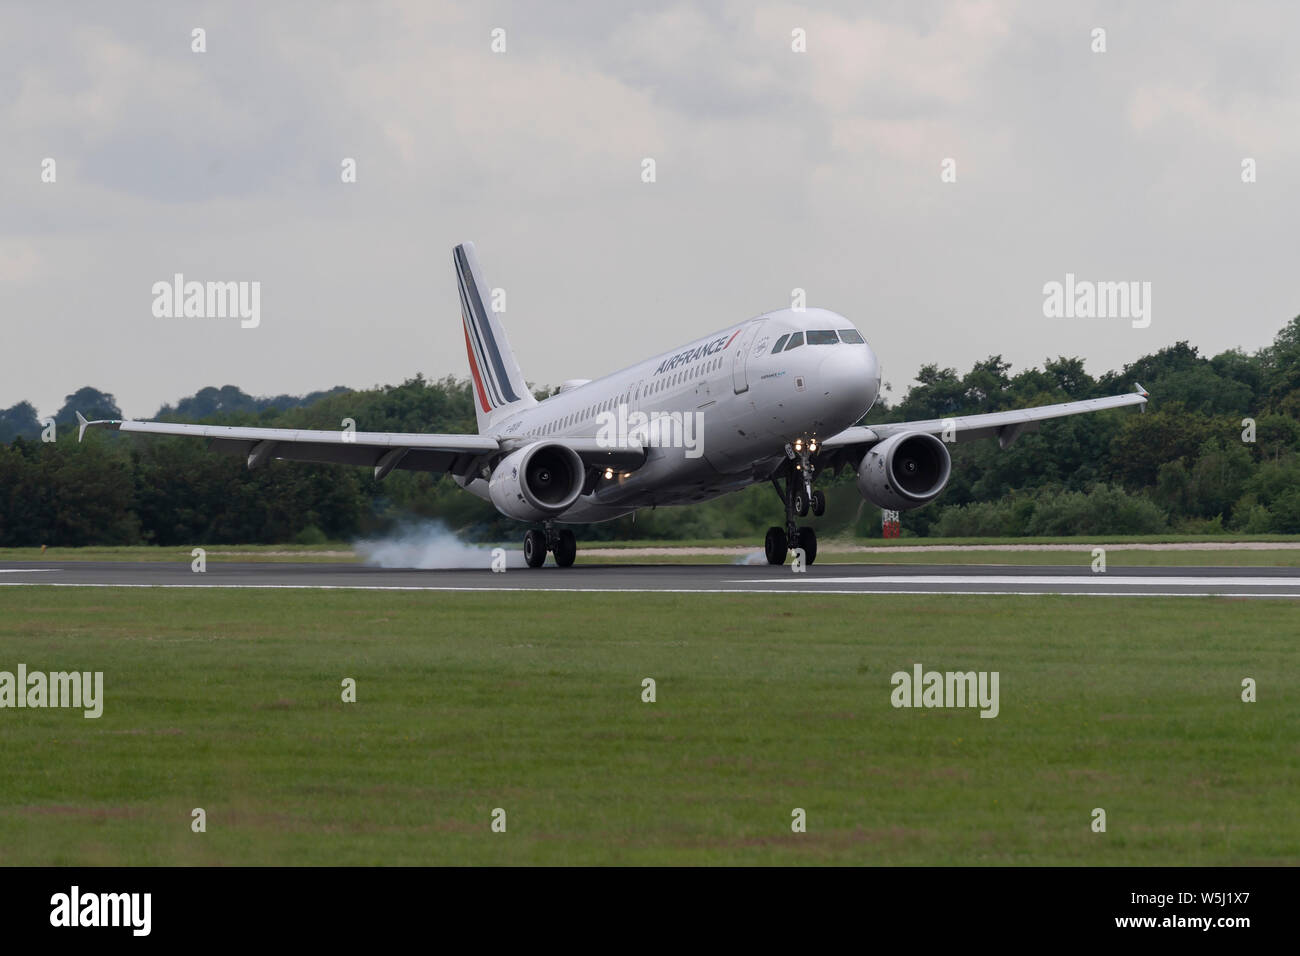 An Air France Airbus A320-200 lands at Manchester International Airport (Editorial use only) Stock Photo